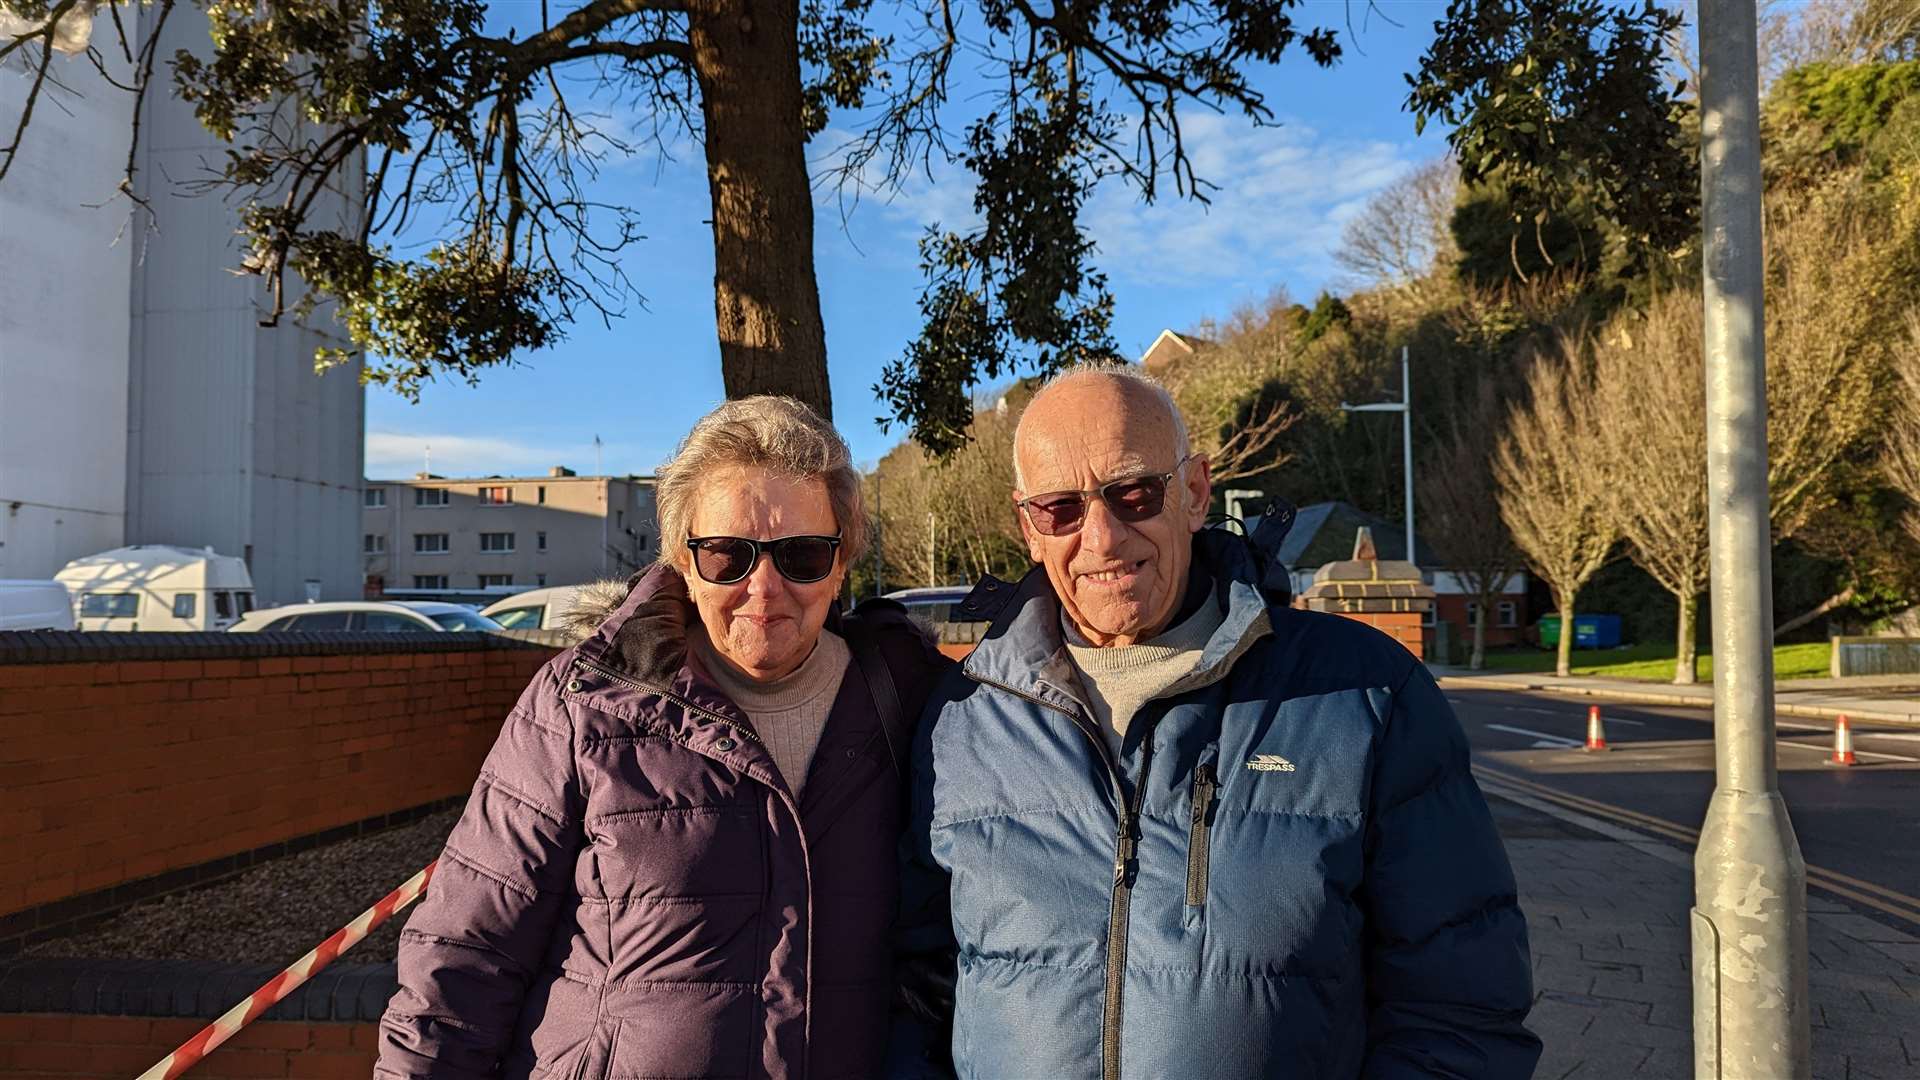 Tourists Joy Pugsley and her husband Graham, from Clevedon in Somerset, have described their nightmare stay at the Grand Burstin hotel in Folkestone